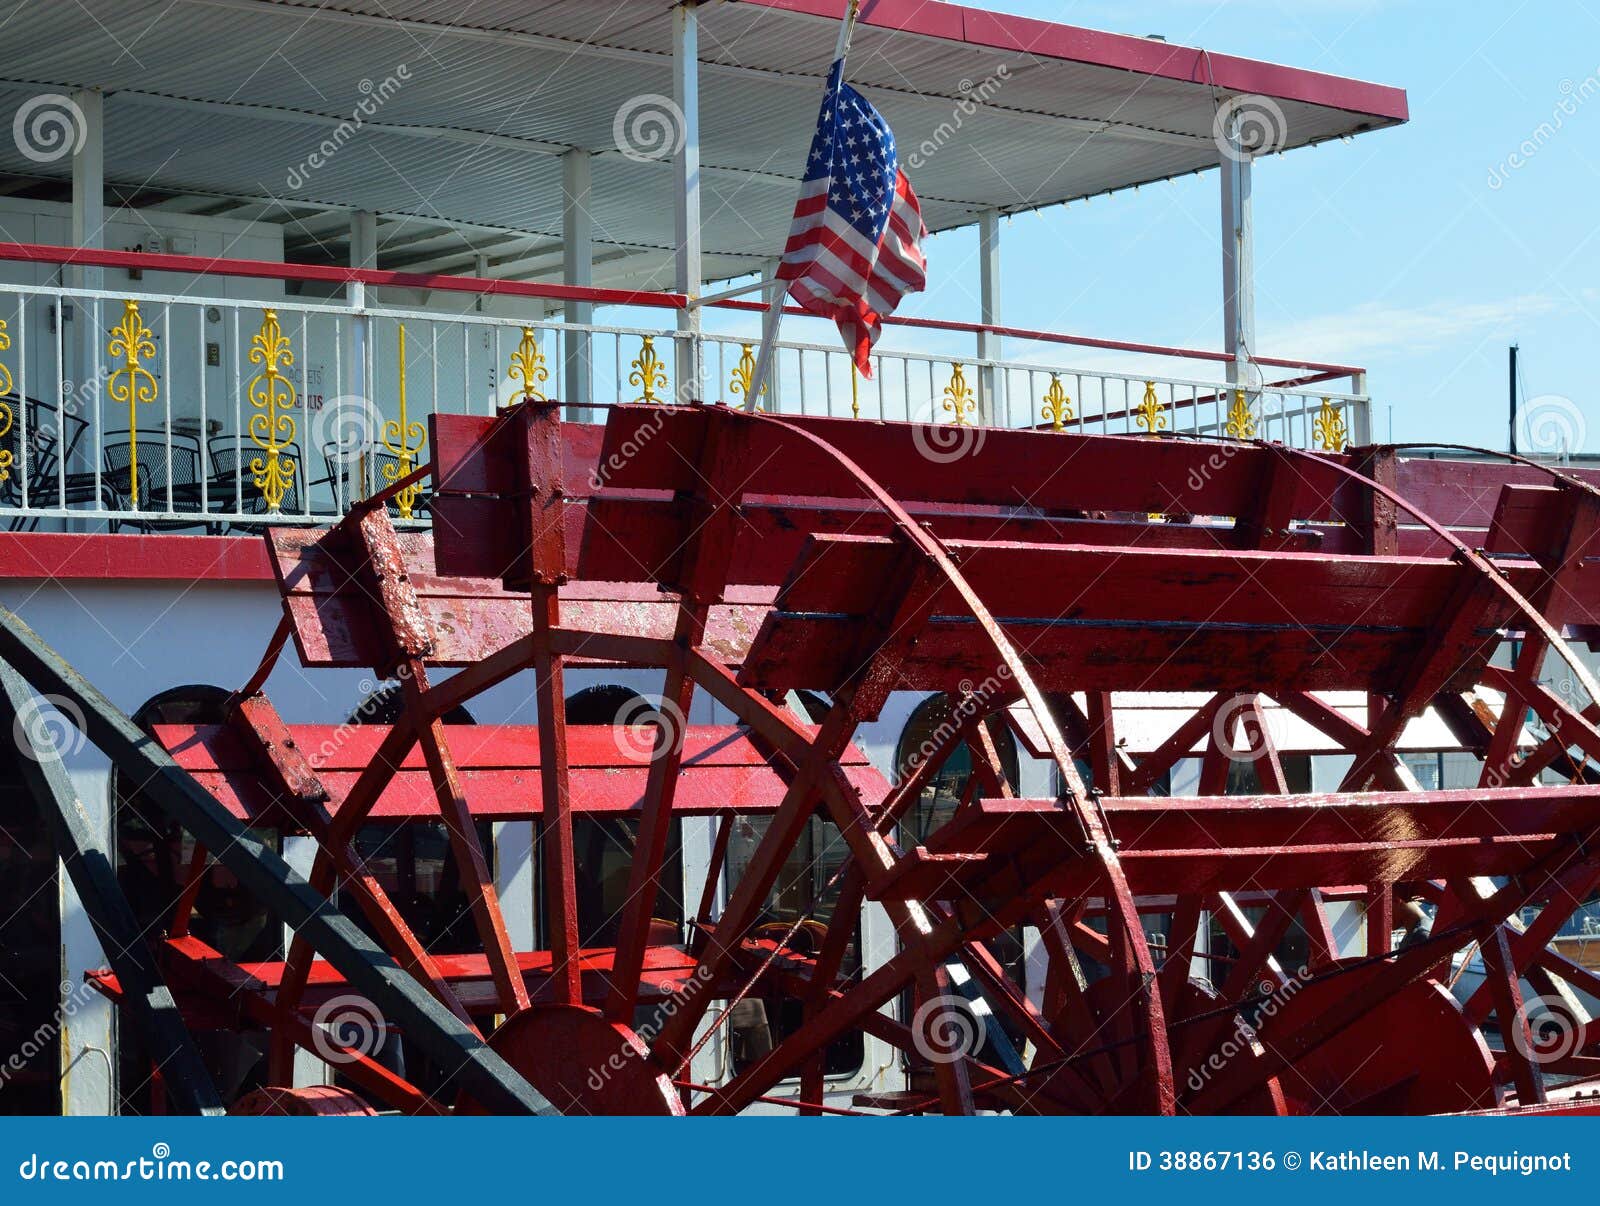 American Flag And Red Paddle Wheel Boat Stock Photo 